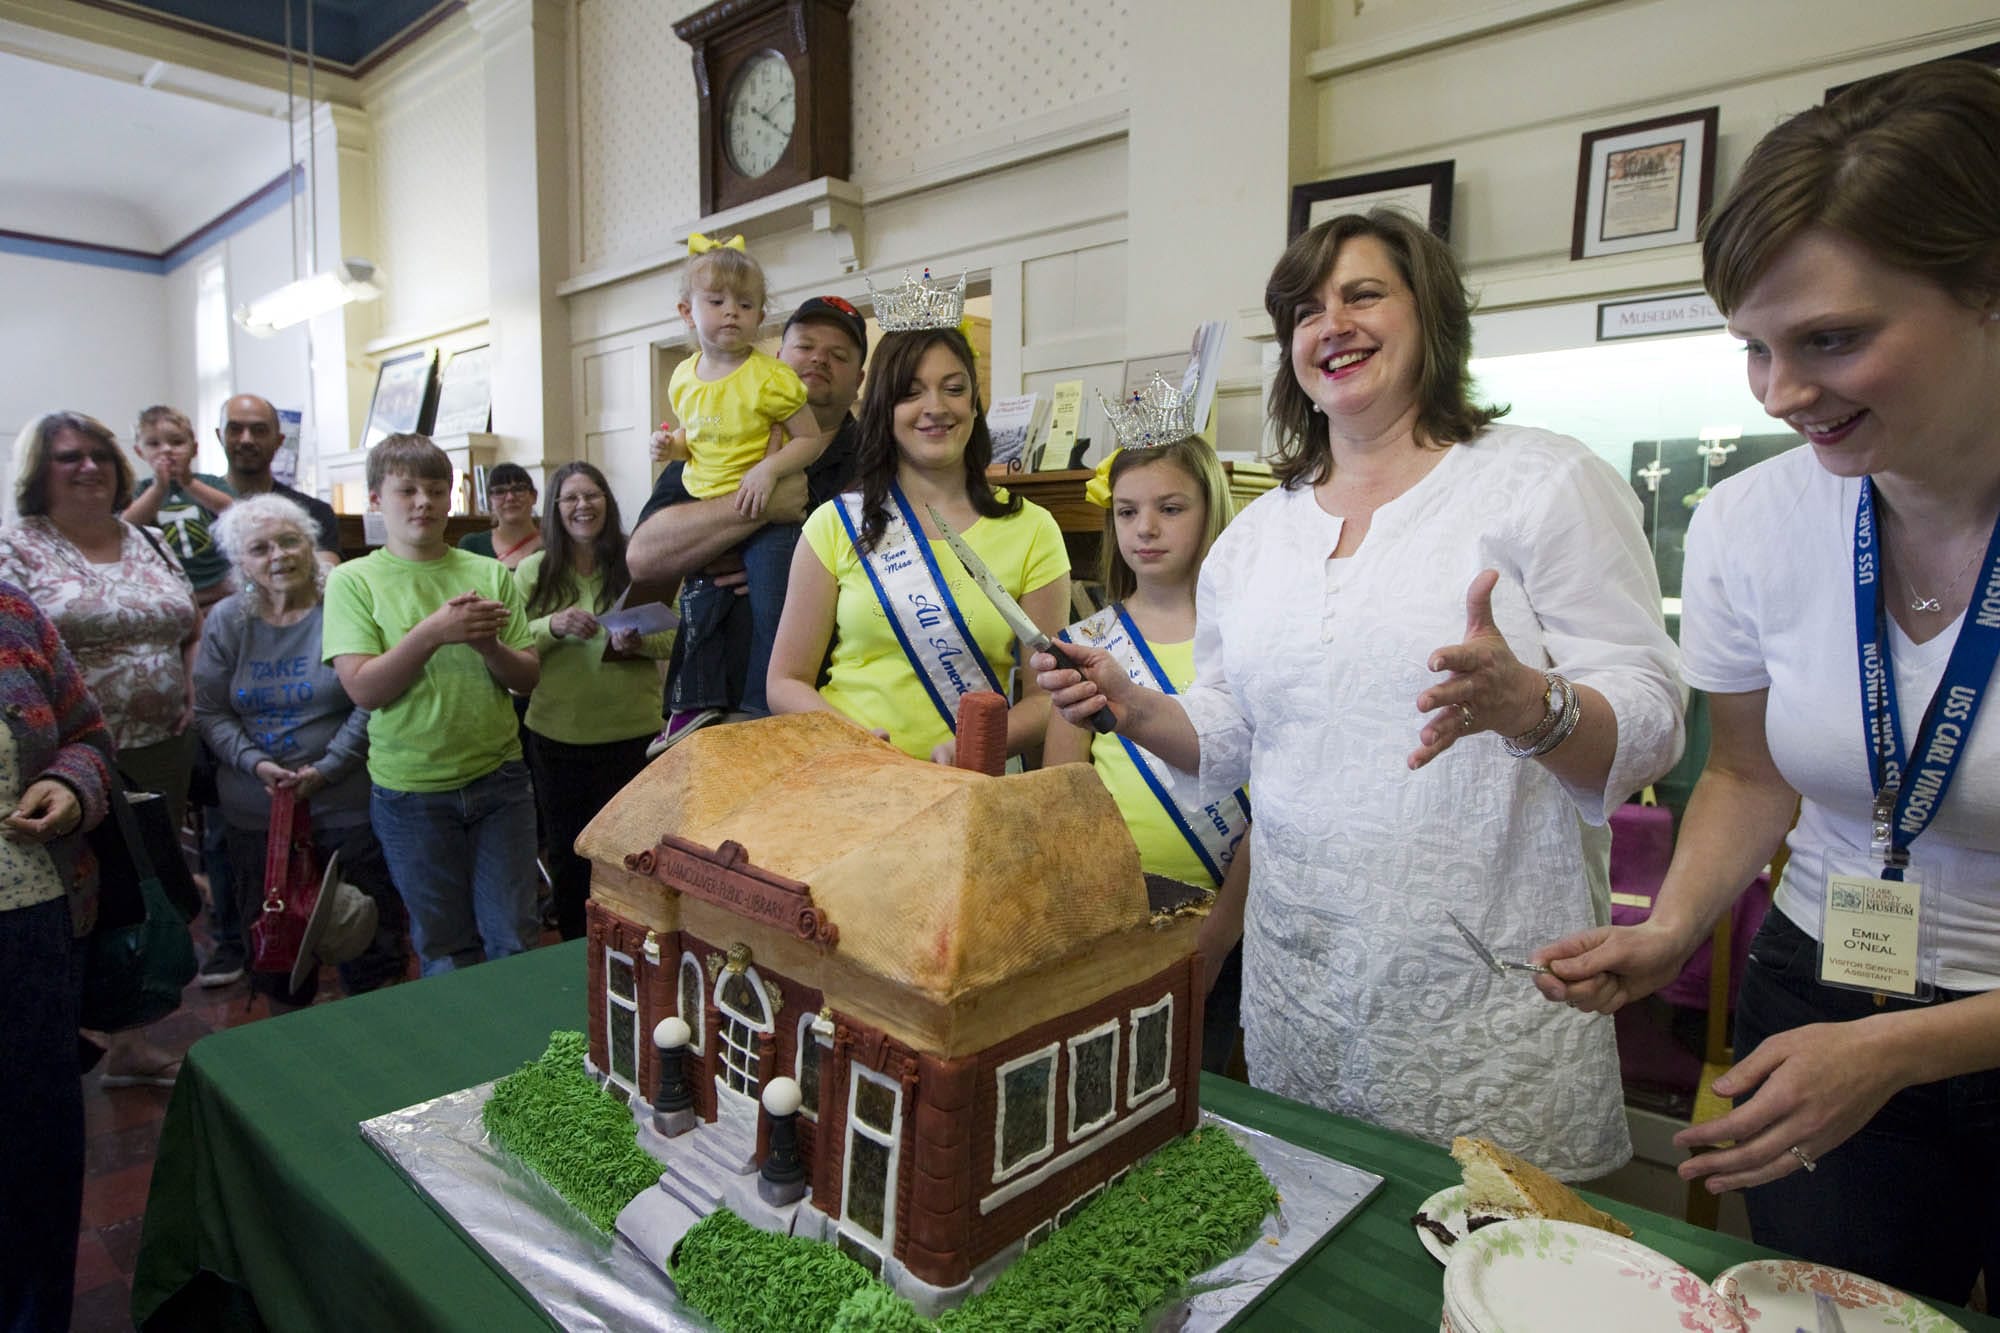 Outgoing Clark County Historical Museum Executive Director Susan Tissot cuts a cake created in the likeness of the museum to celebrate the 50th anniversary of its dedication.